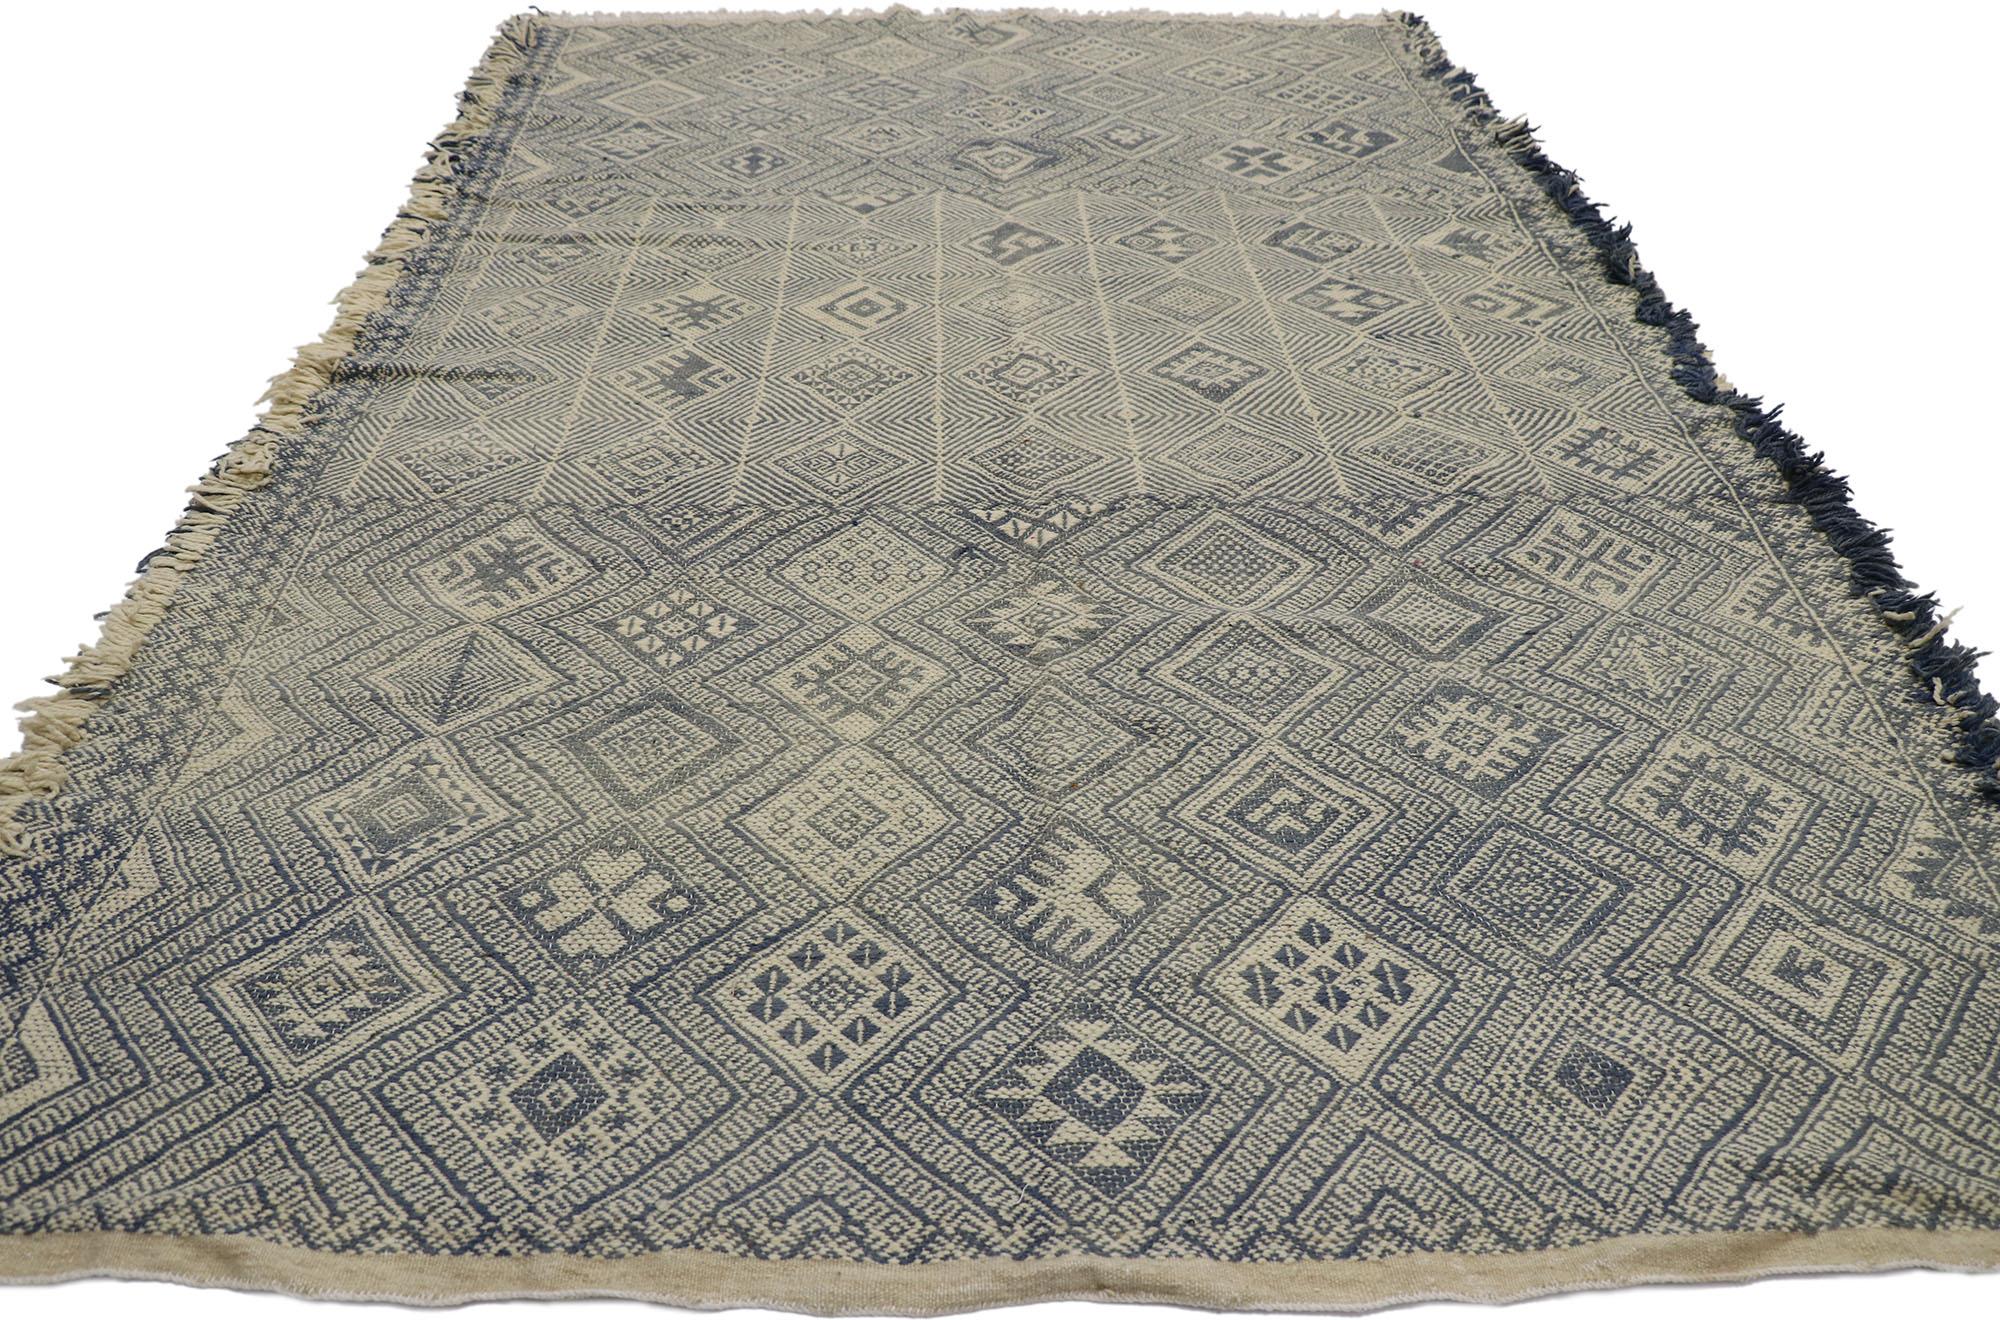 Bohemian Vintage Zemmour Moroccan Kilim Rug with Boho Chic Tribal Style For Sale